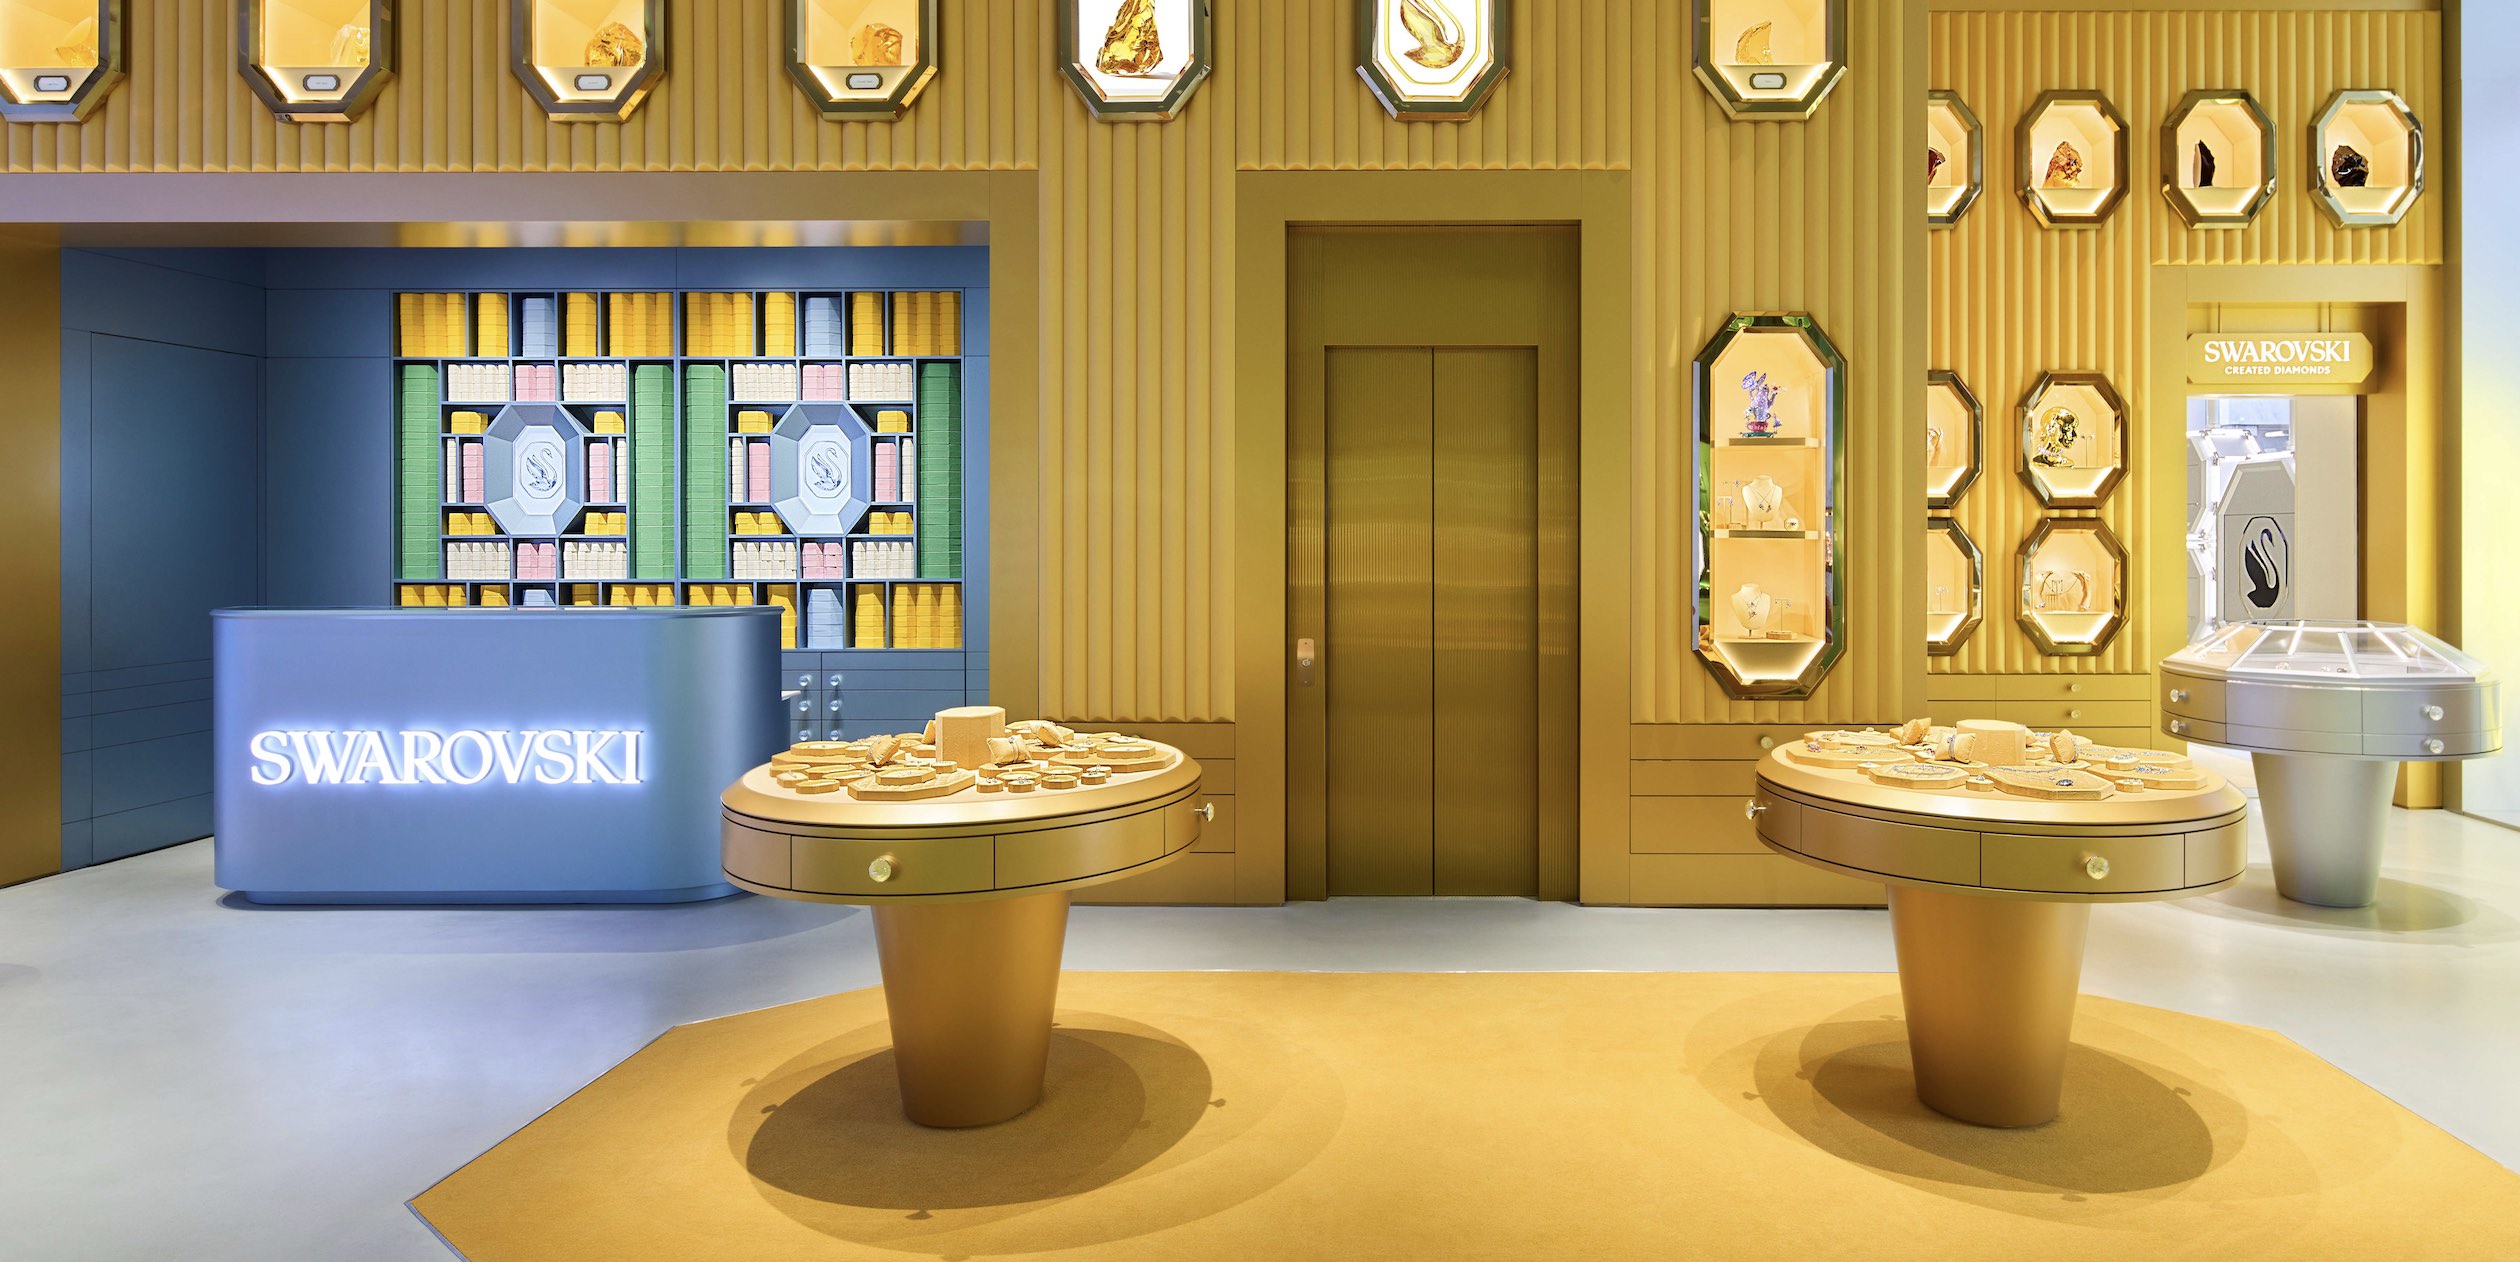 Swarovski inaugurates the new flagship store in the heart of Milan